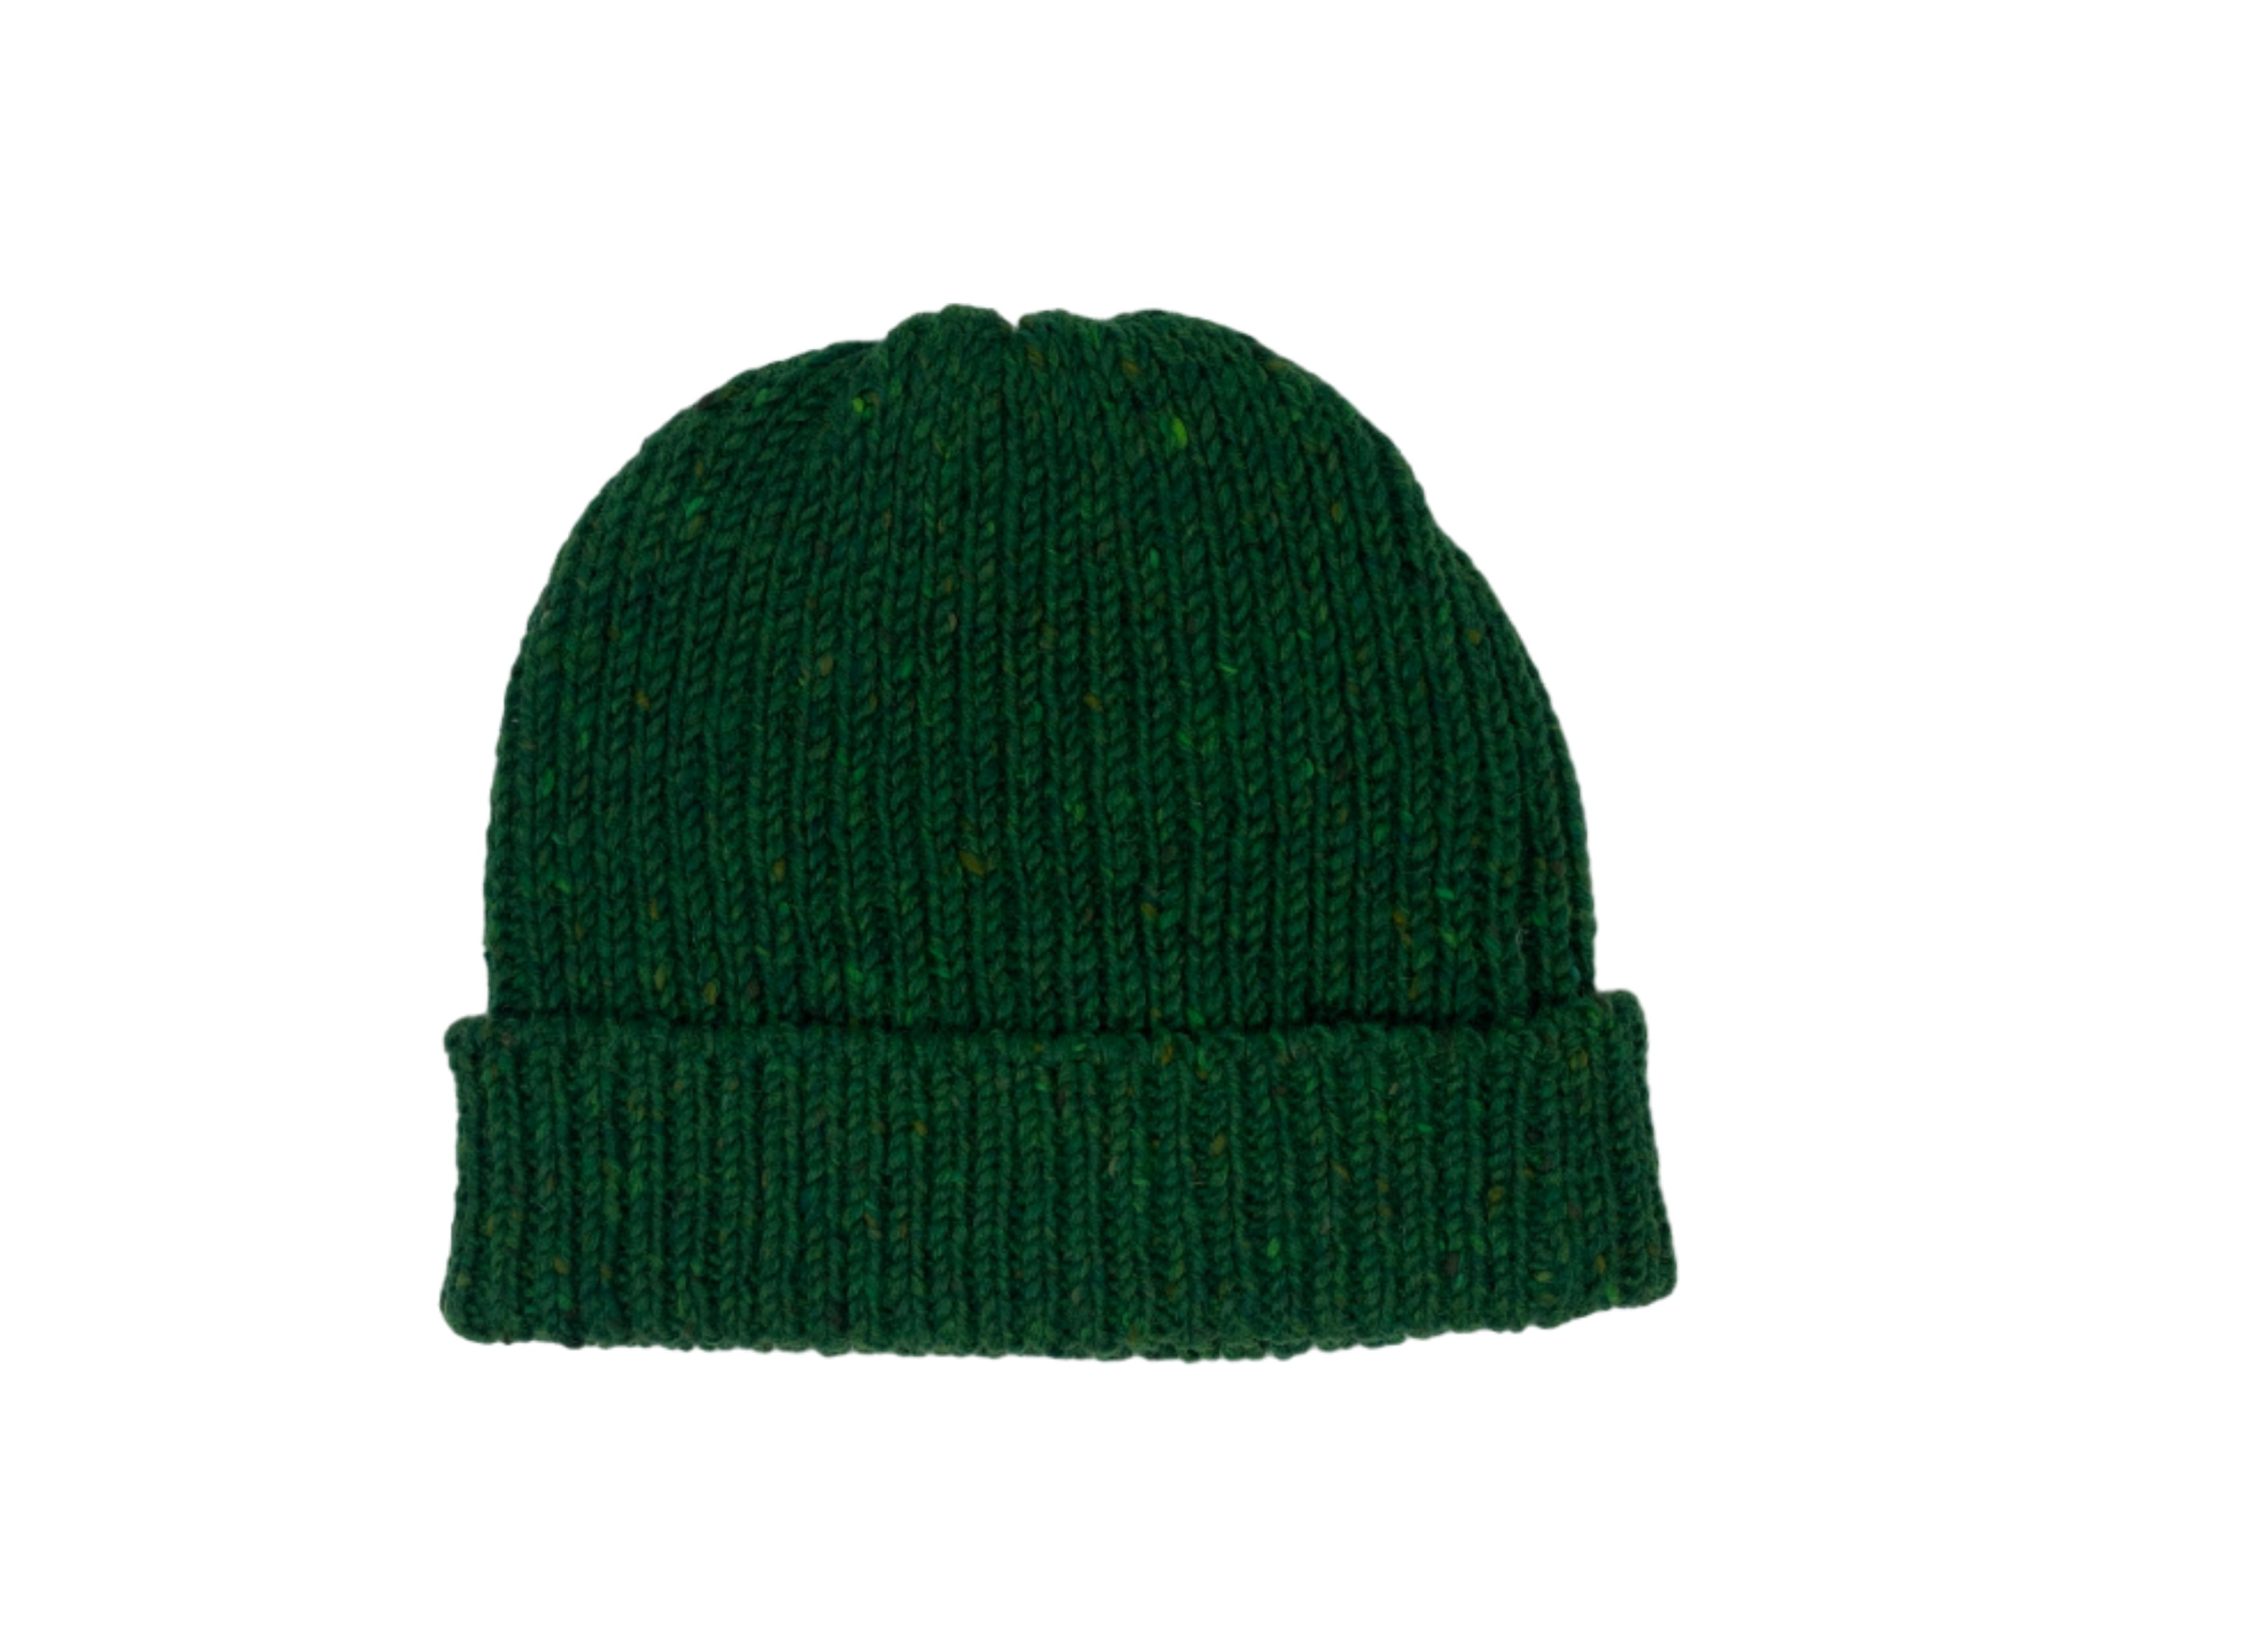 Donegal Beanies